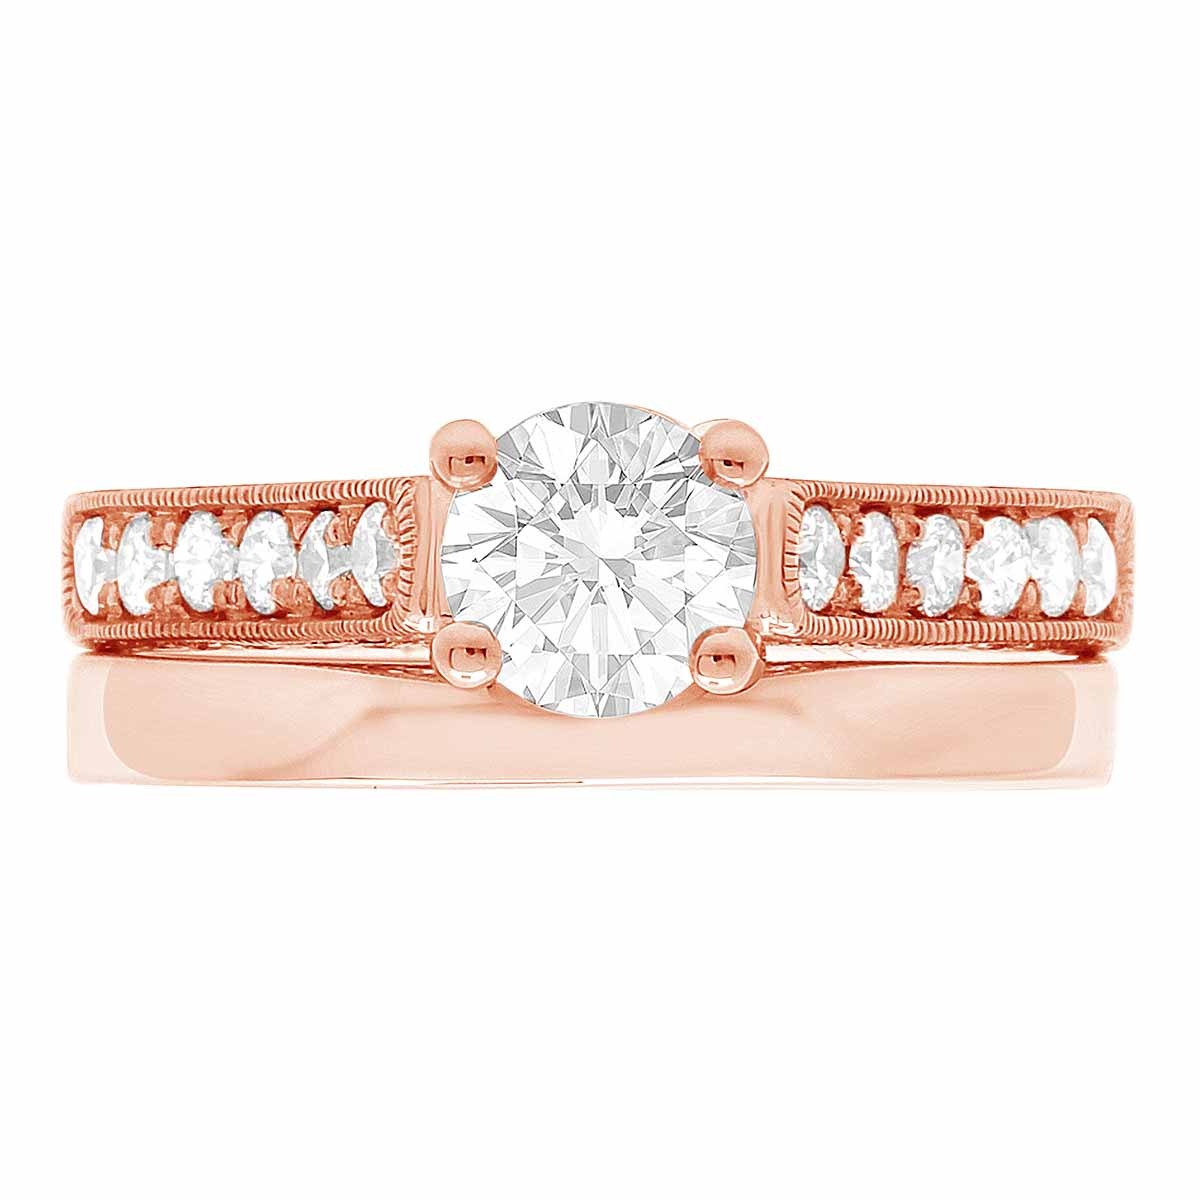 Diamond Encrusted Engagement Ring made in rose gold pictured with a matching plain wedding ring